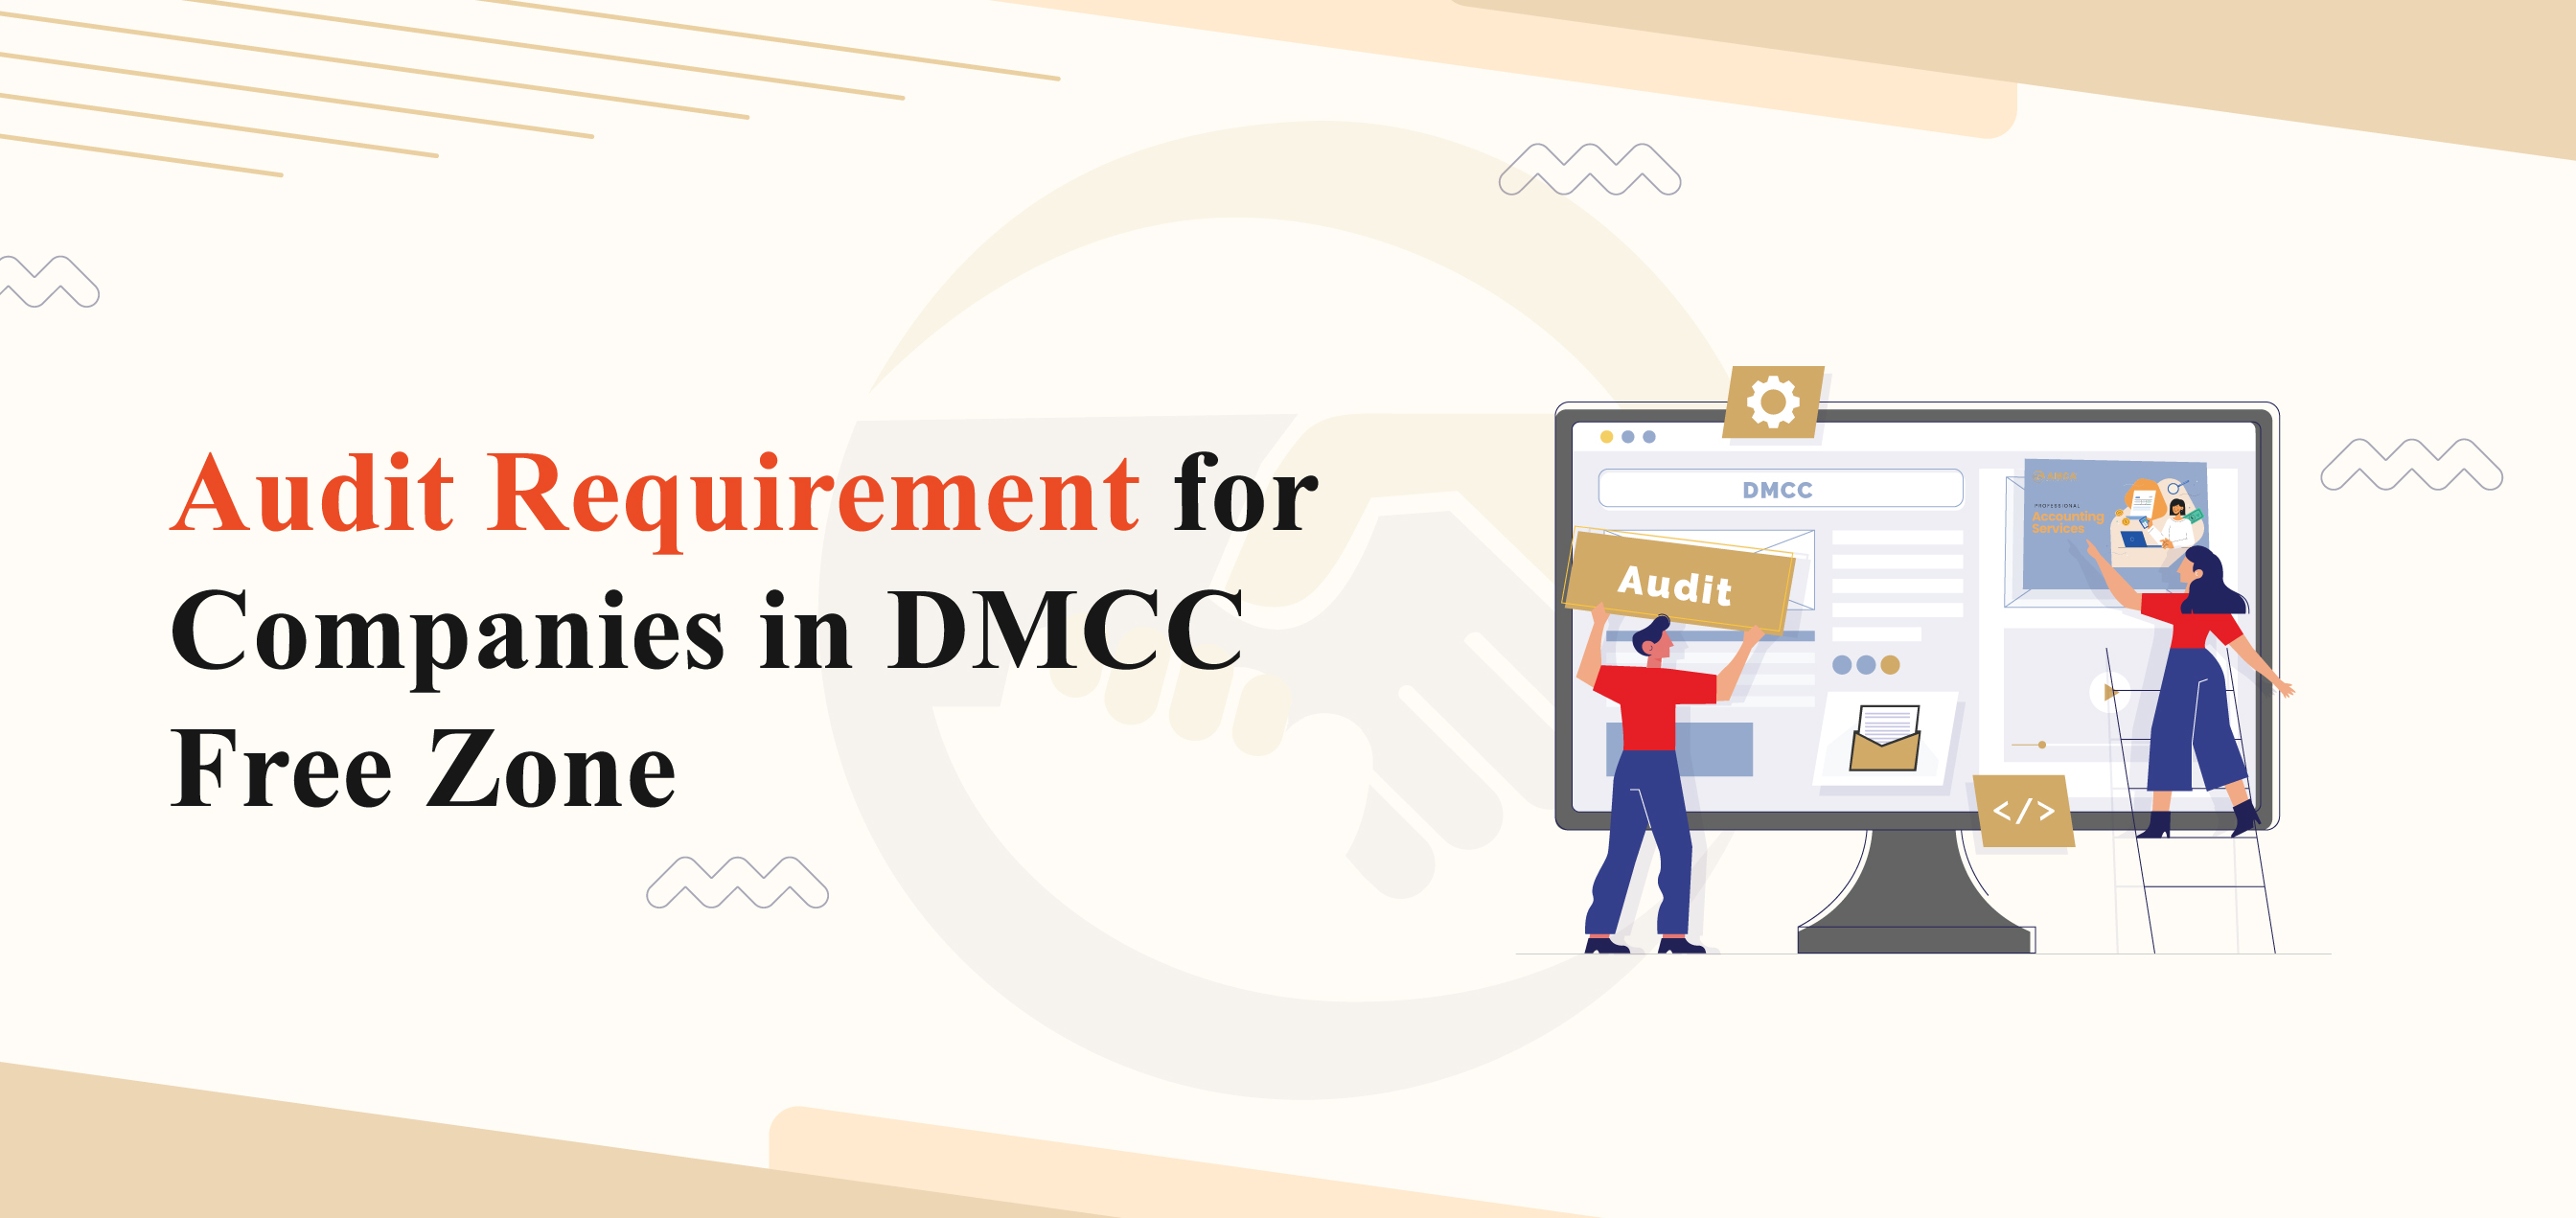 Audit Requirement for Companies in DMCC Free Zone